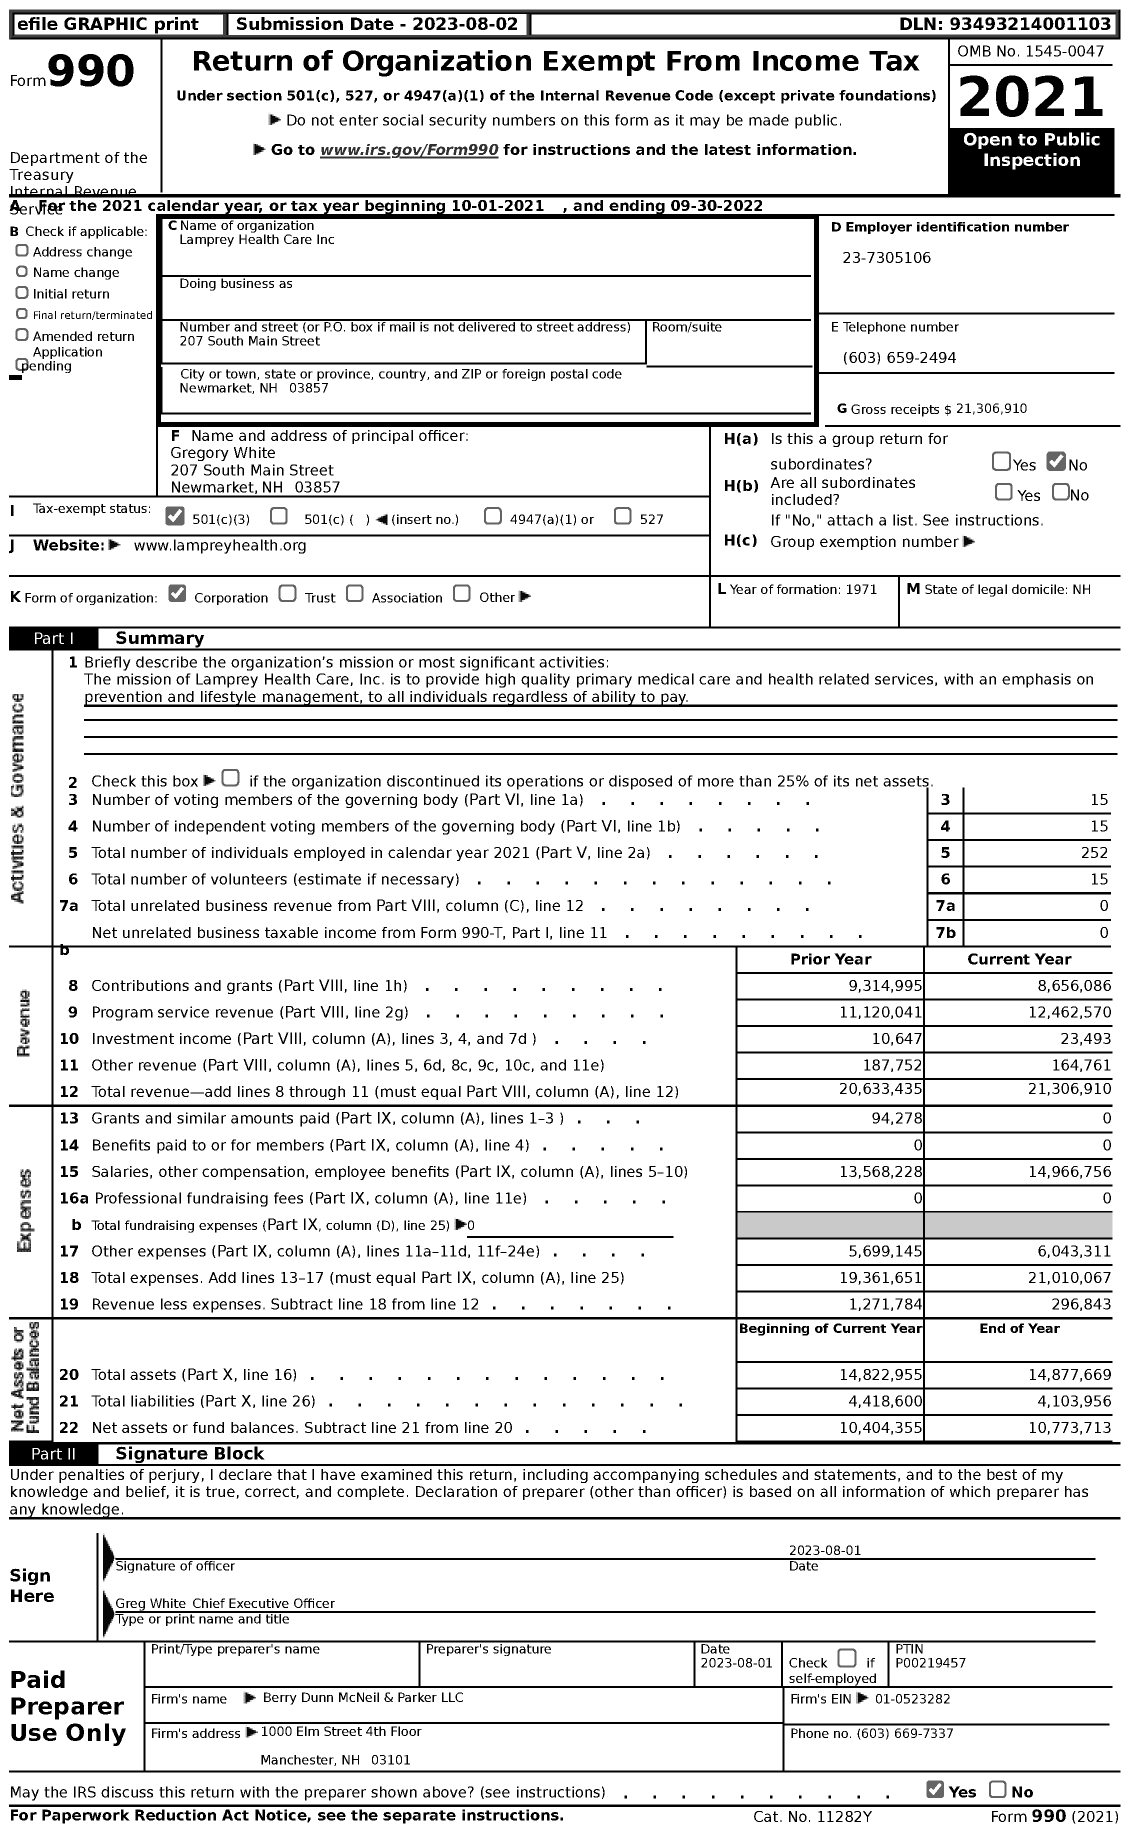 Image of first page of 2021 Form 990 for Lamprey Health Care (LHC)